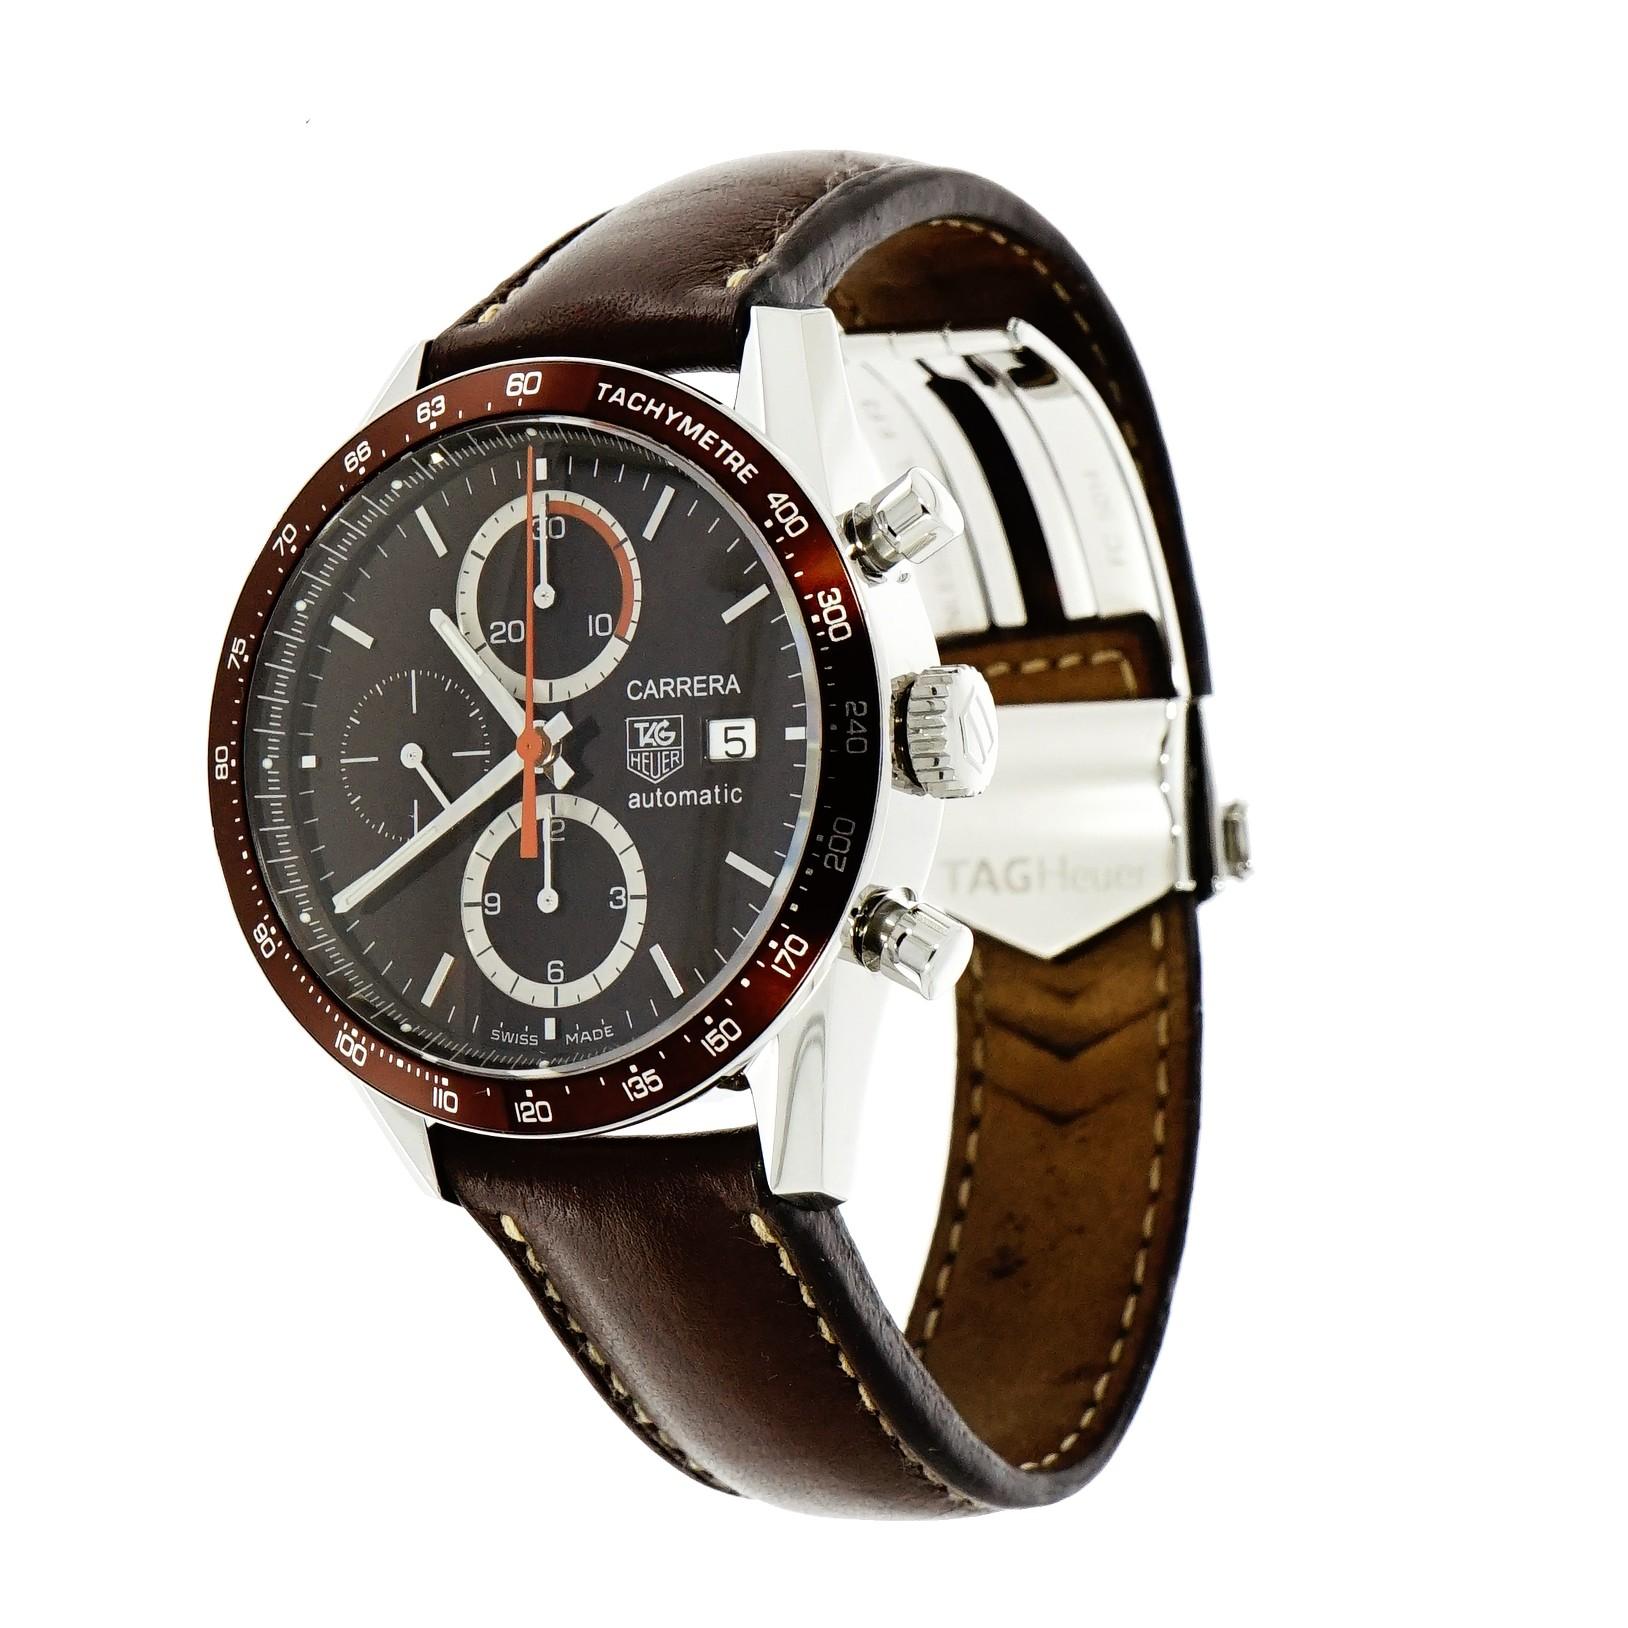 Pre-owned in very good condition Tag Heuer Carrera Chronograph, stainless steel 41.5 mm case, fixed tachymeter scale brown ion plated aluminum bezel, brown dial with luminous hands and index hour markers, minute markers around the outer rim, date at